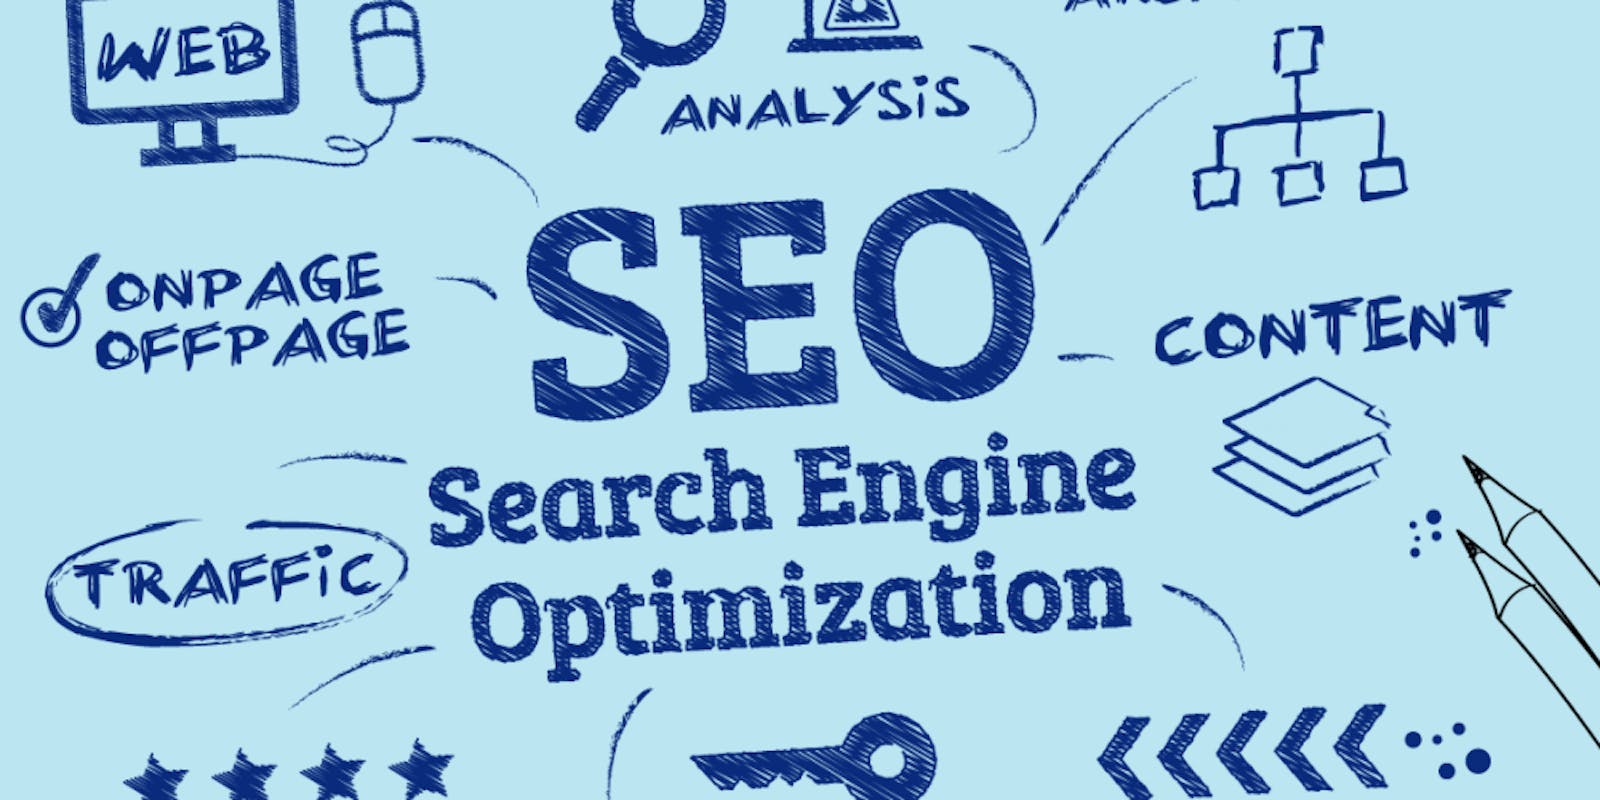 What is Search Engine Optimization and how is it useful?